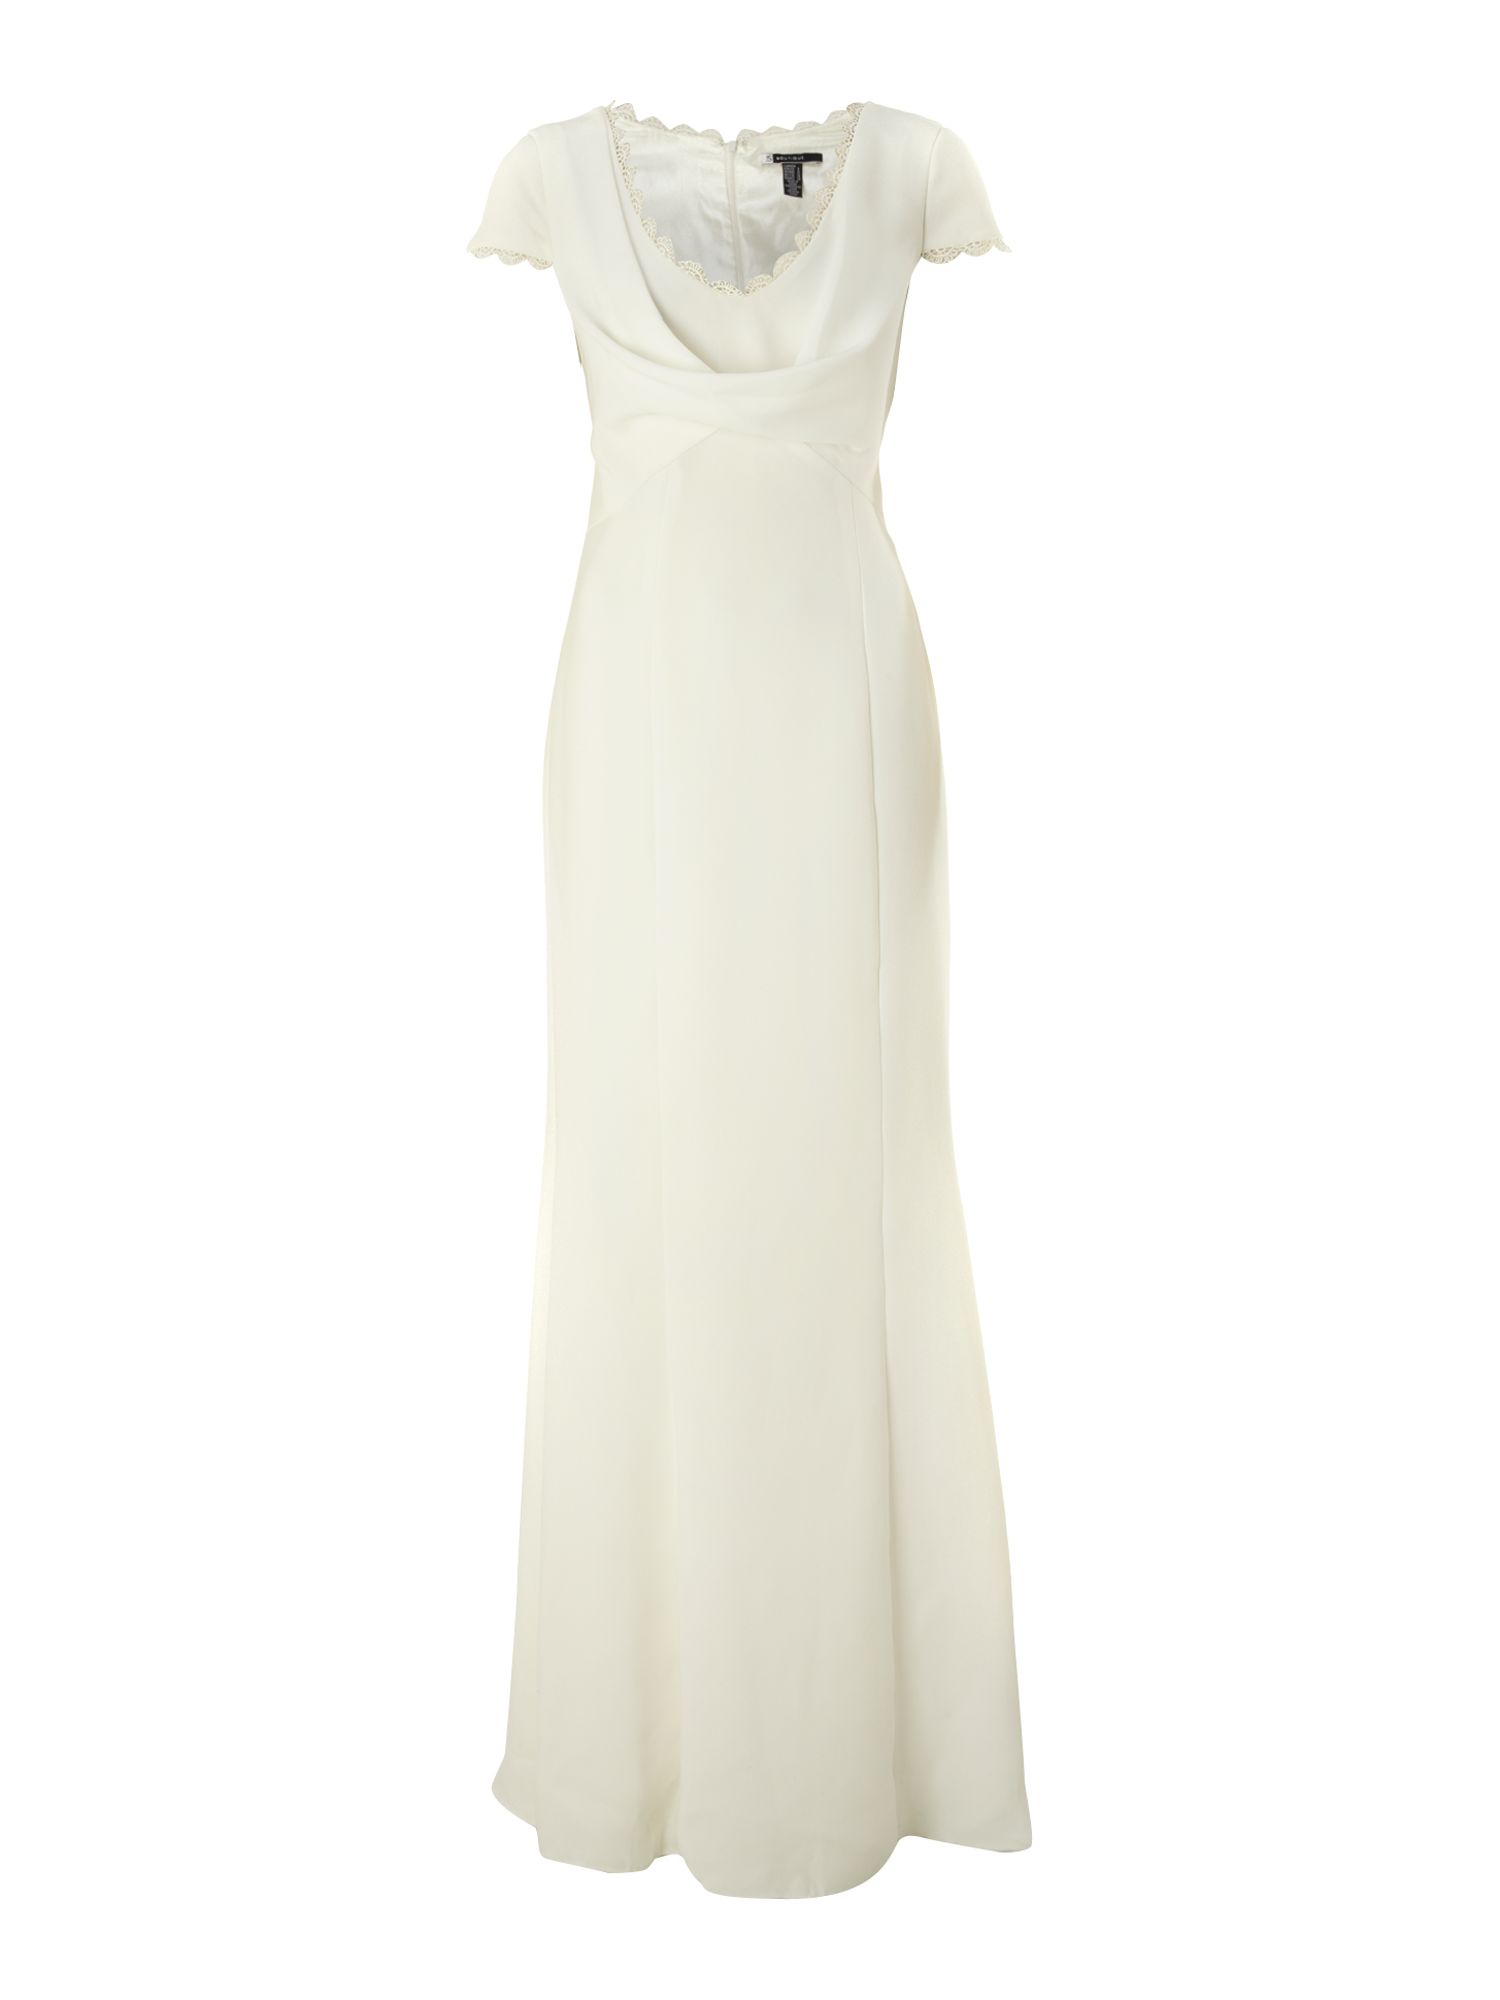 Js Collections Cowl Neck Button Back Dress in White (Ivory) | Lyst